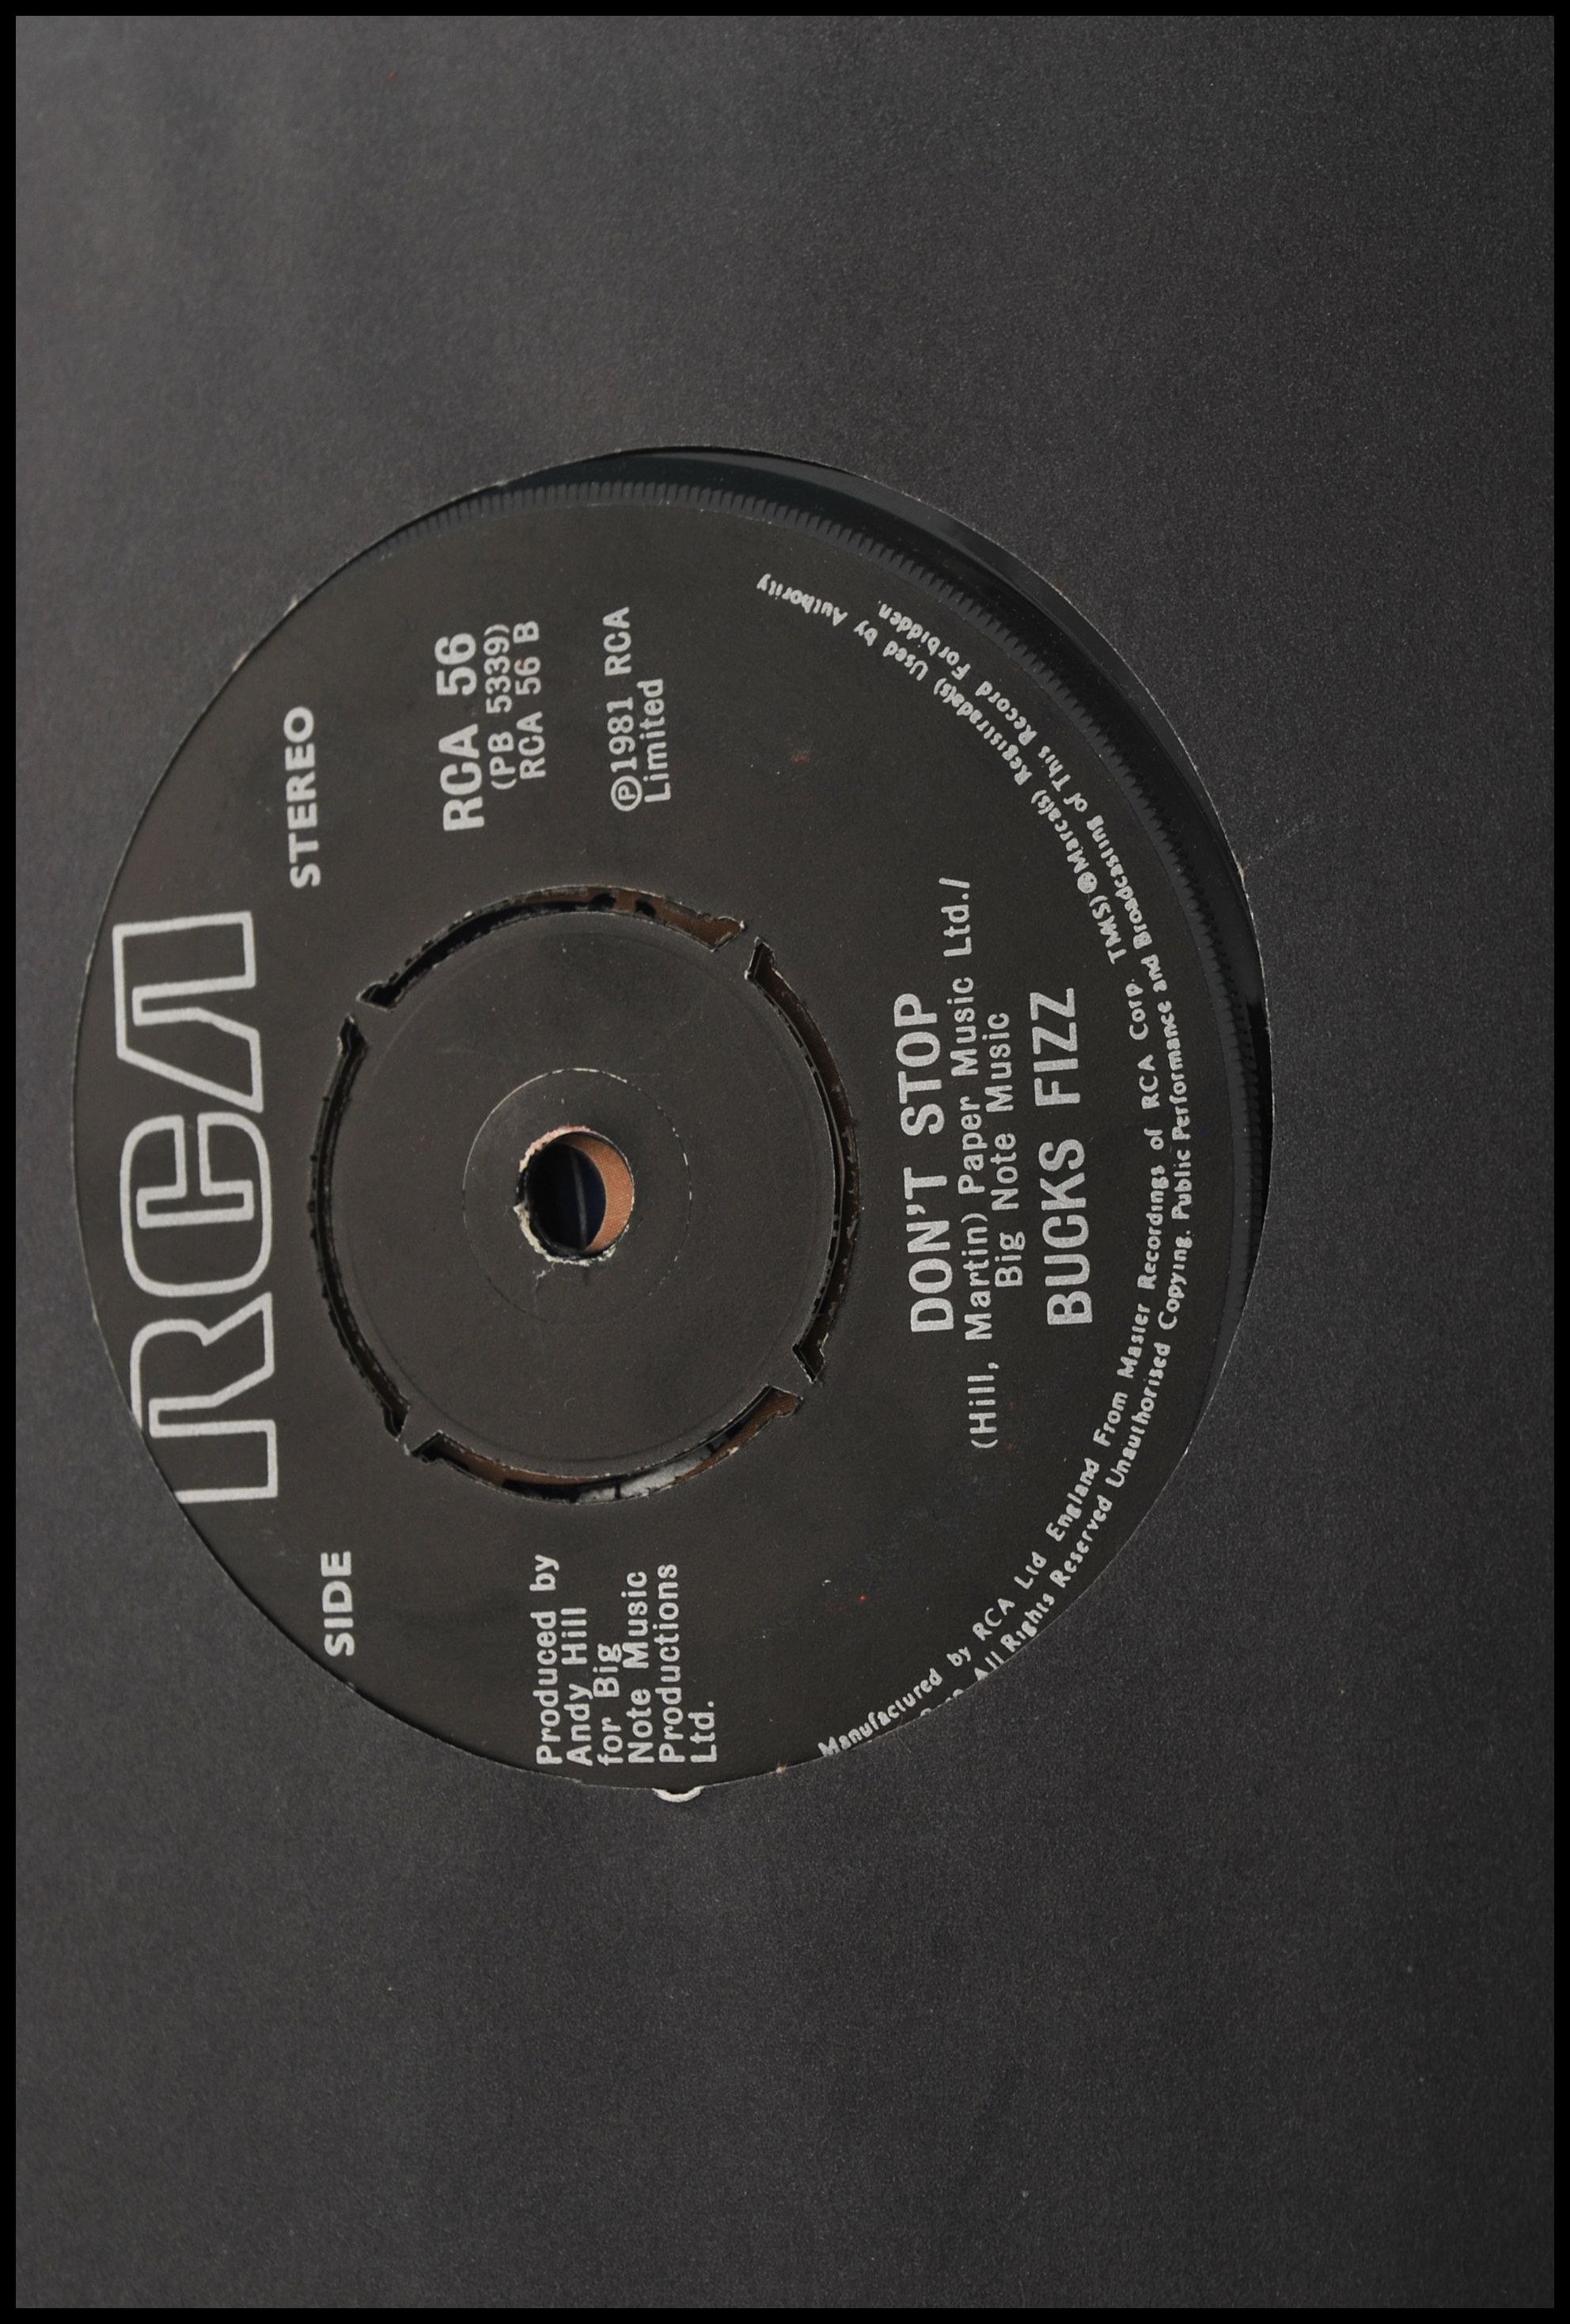 A collection of vinyl 7" 45rpm record singles dating from the 1960s featuring various artists and - Image 9 of 11